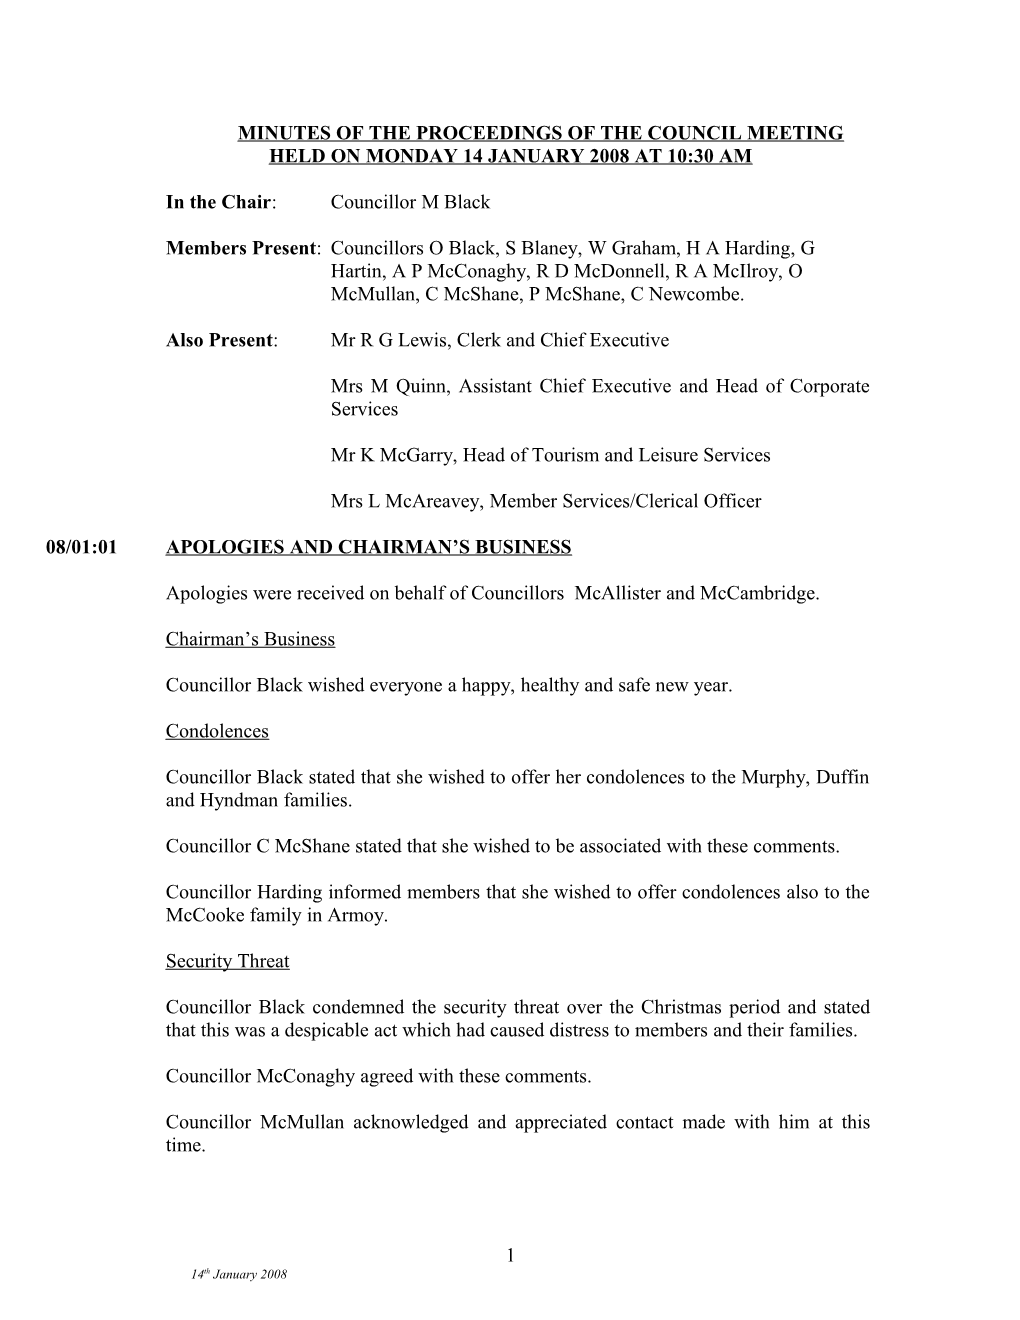 Minutes of the Proceedings of the Council Meeting Held s2